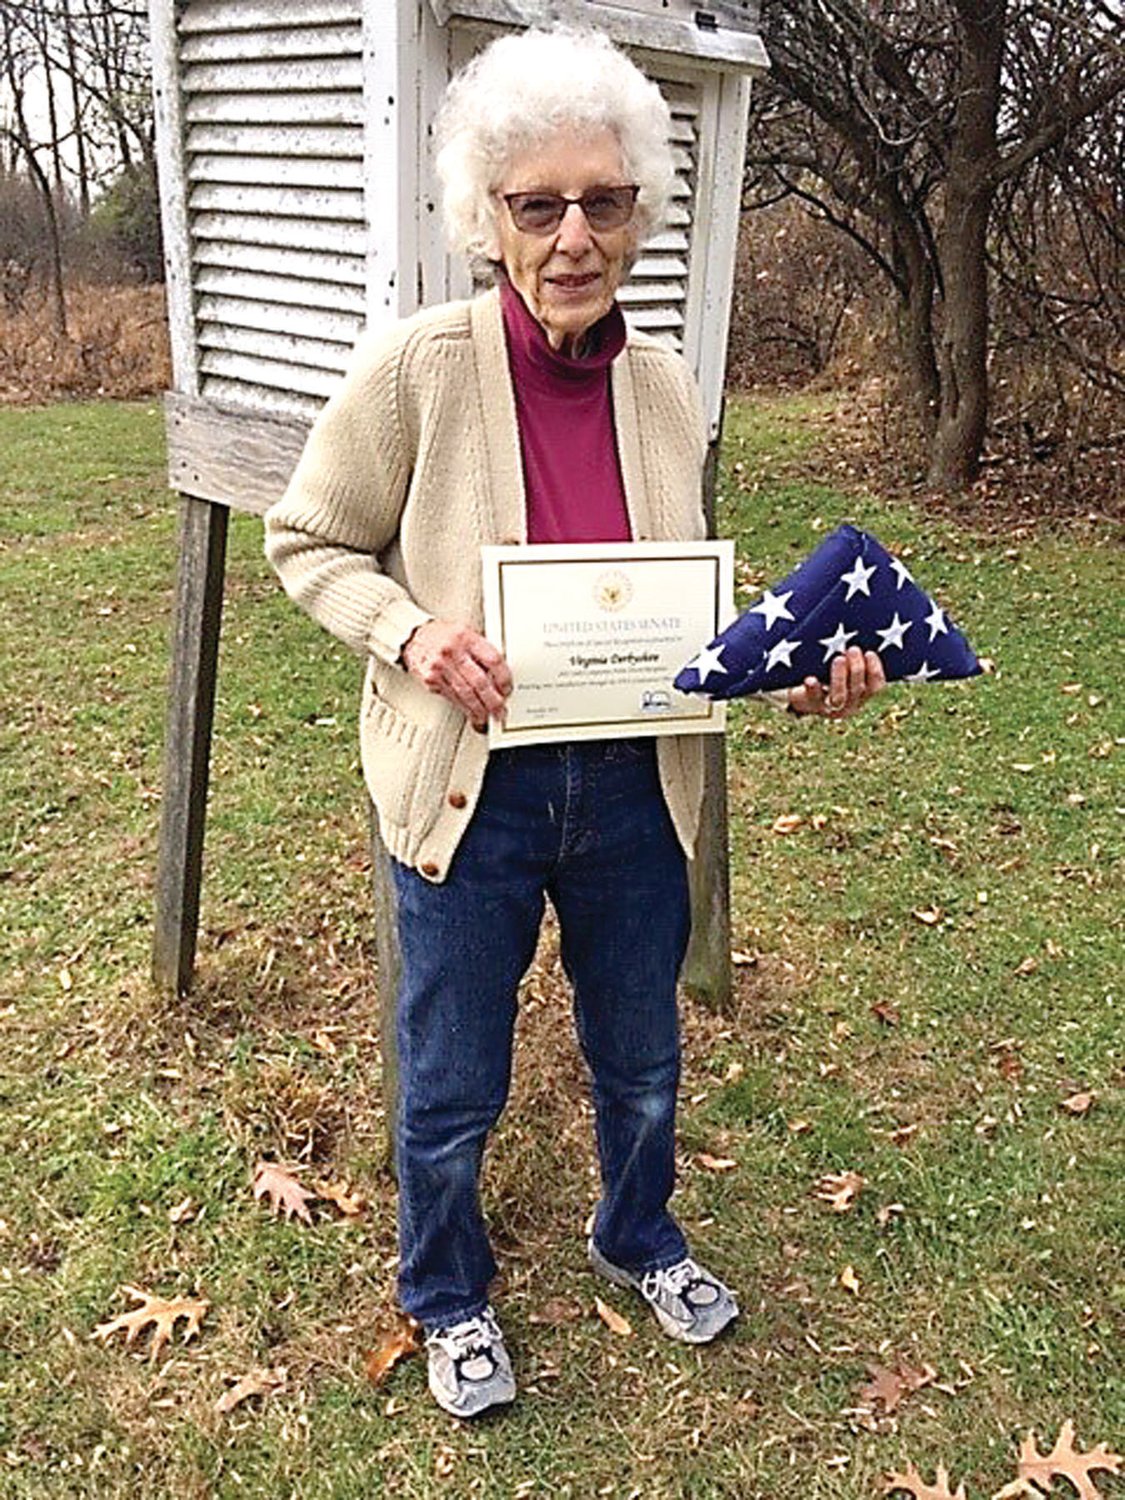 Virginia Derbyshire, standing in front of her weather station, displays her national NOAA award for outstanding volunteer service and an America flag that flew over the U.S. Capitol.